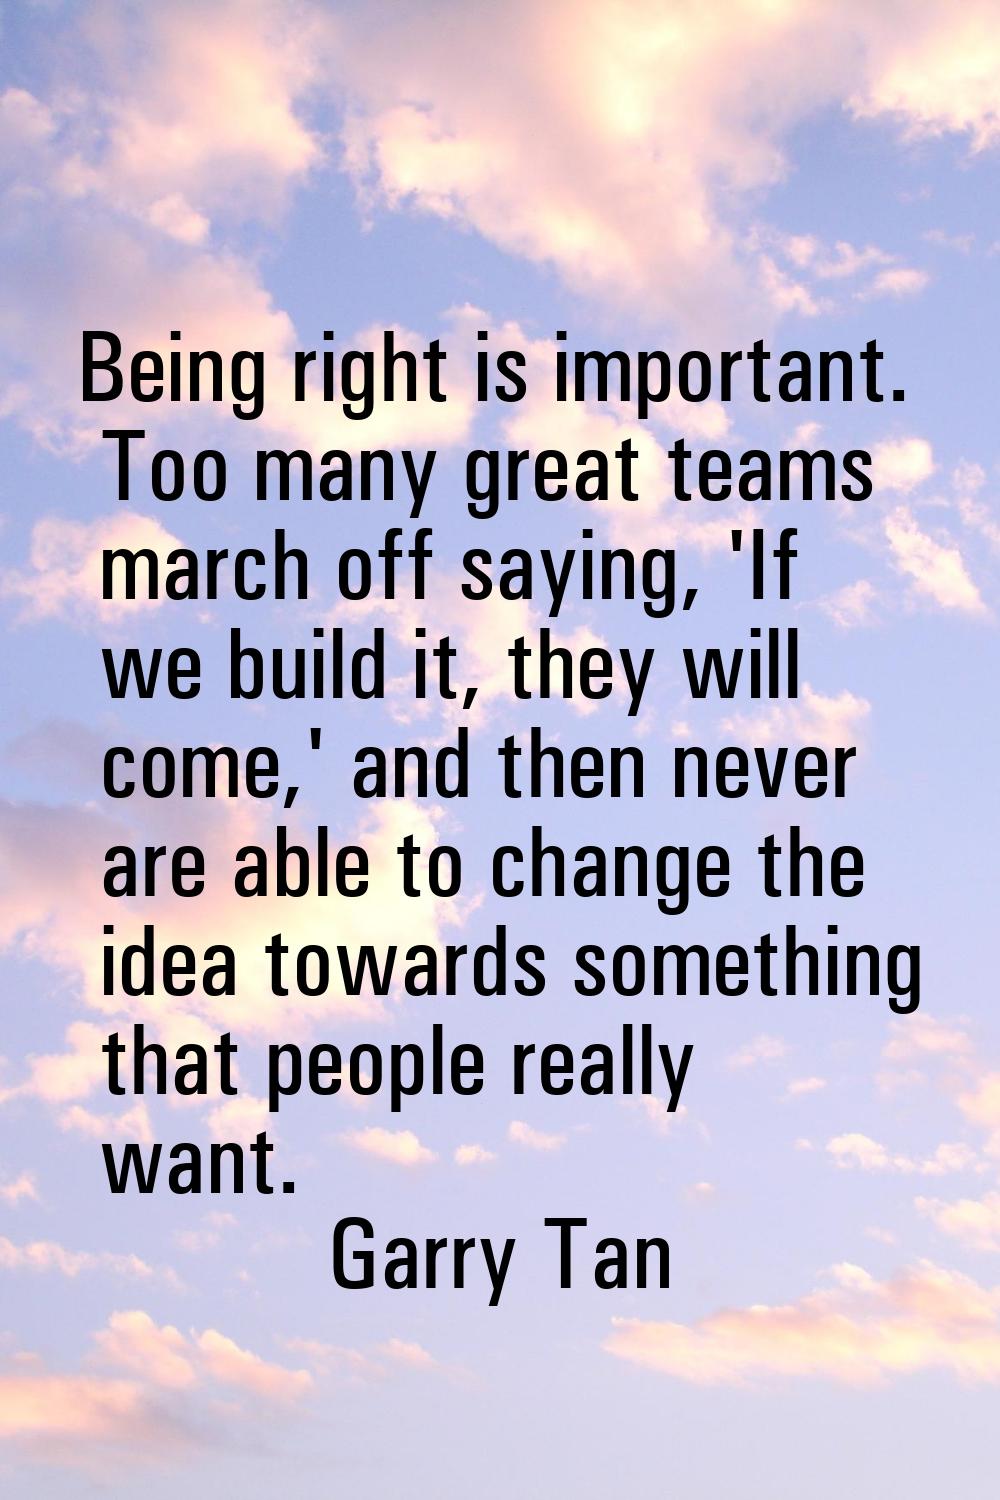 Being right is important. Too many great teams march off saying, 'If we build it, they will come,' 